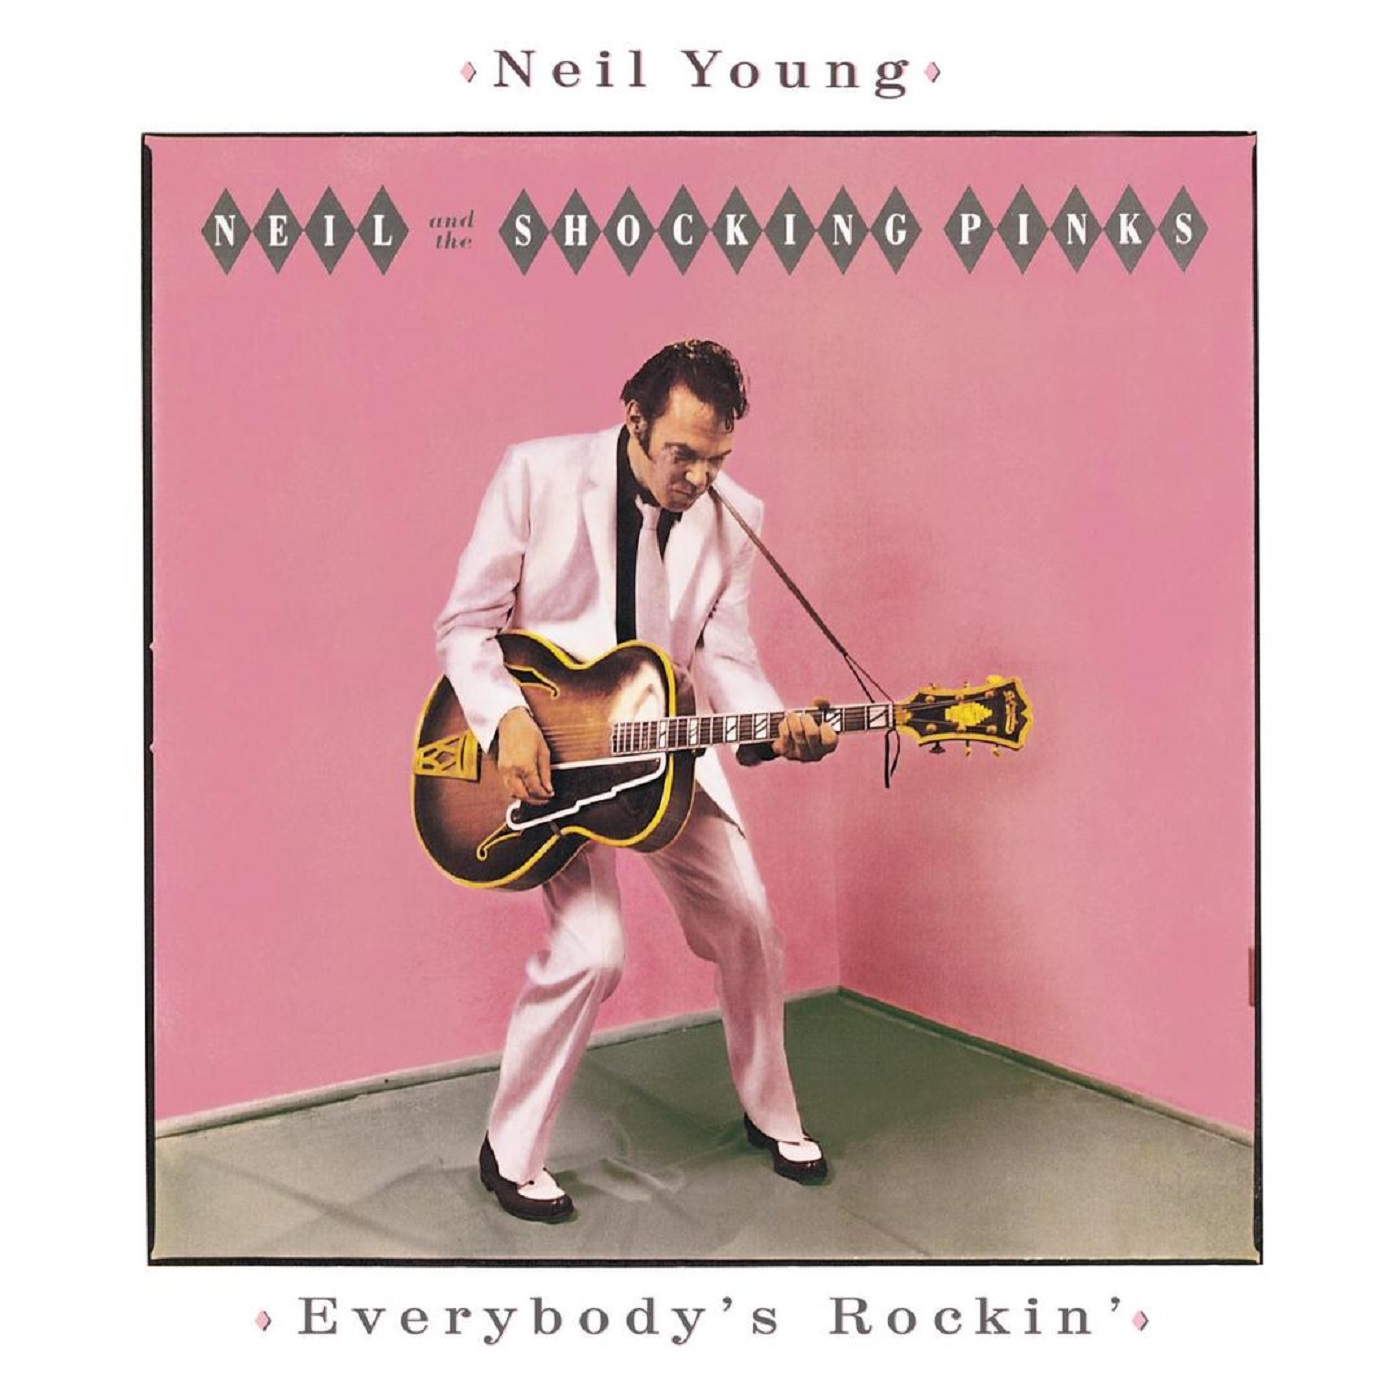 Neil Young’s “Everybody’s Rockin’”